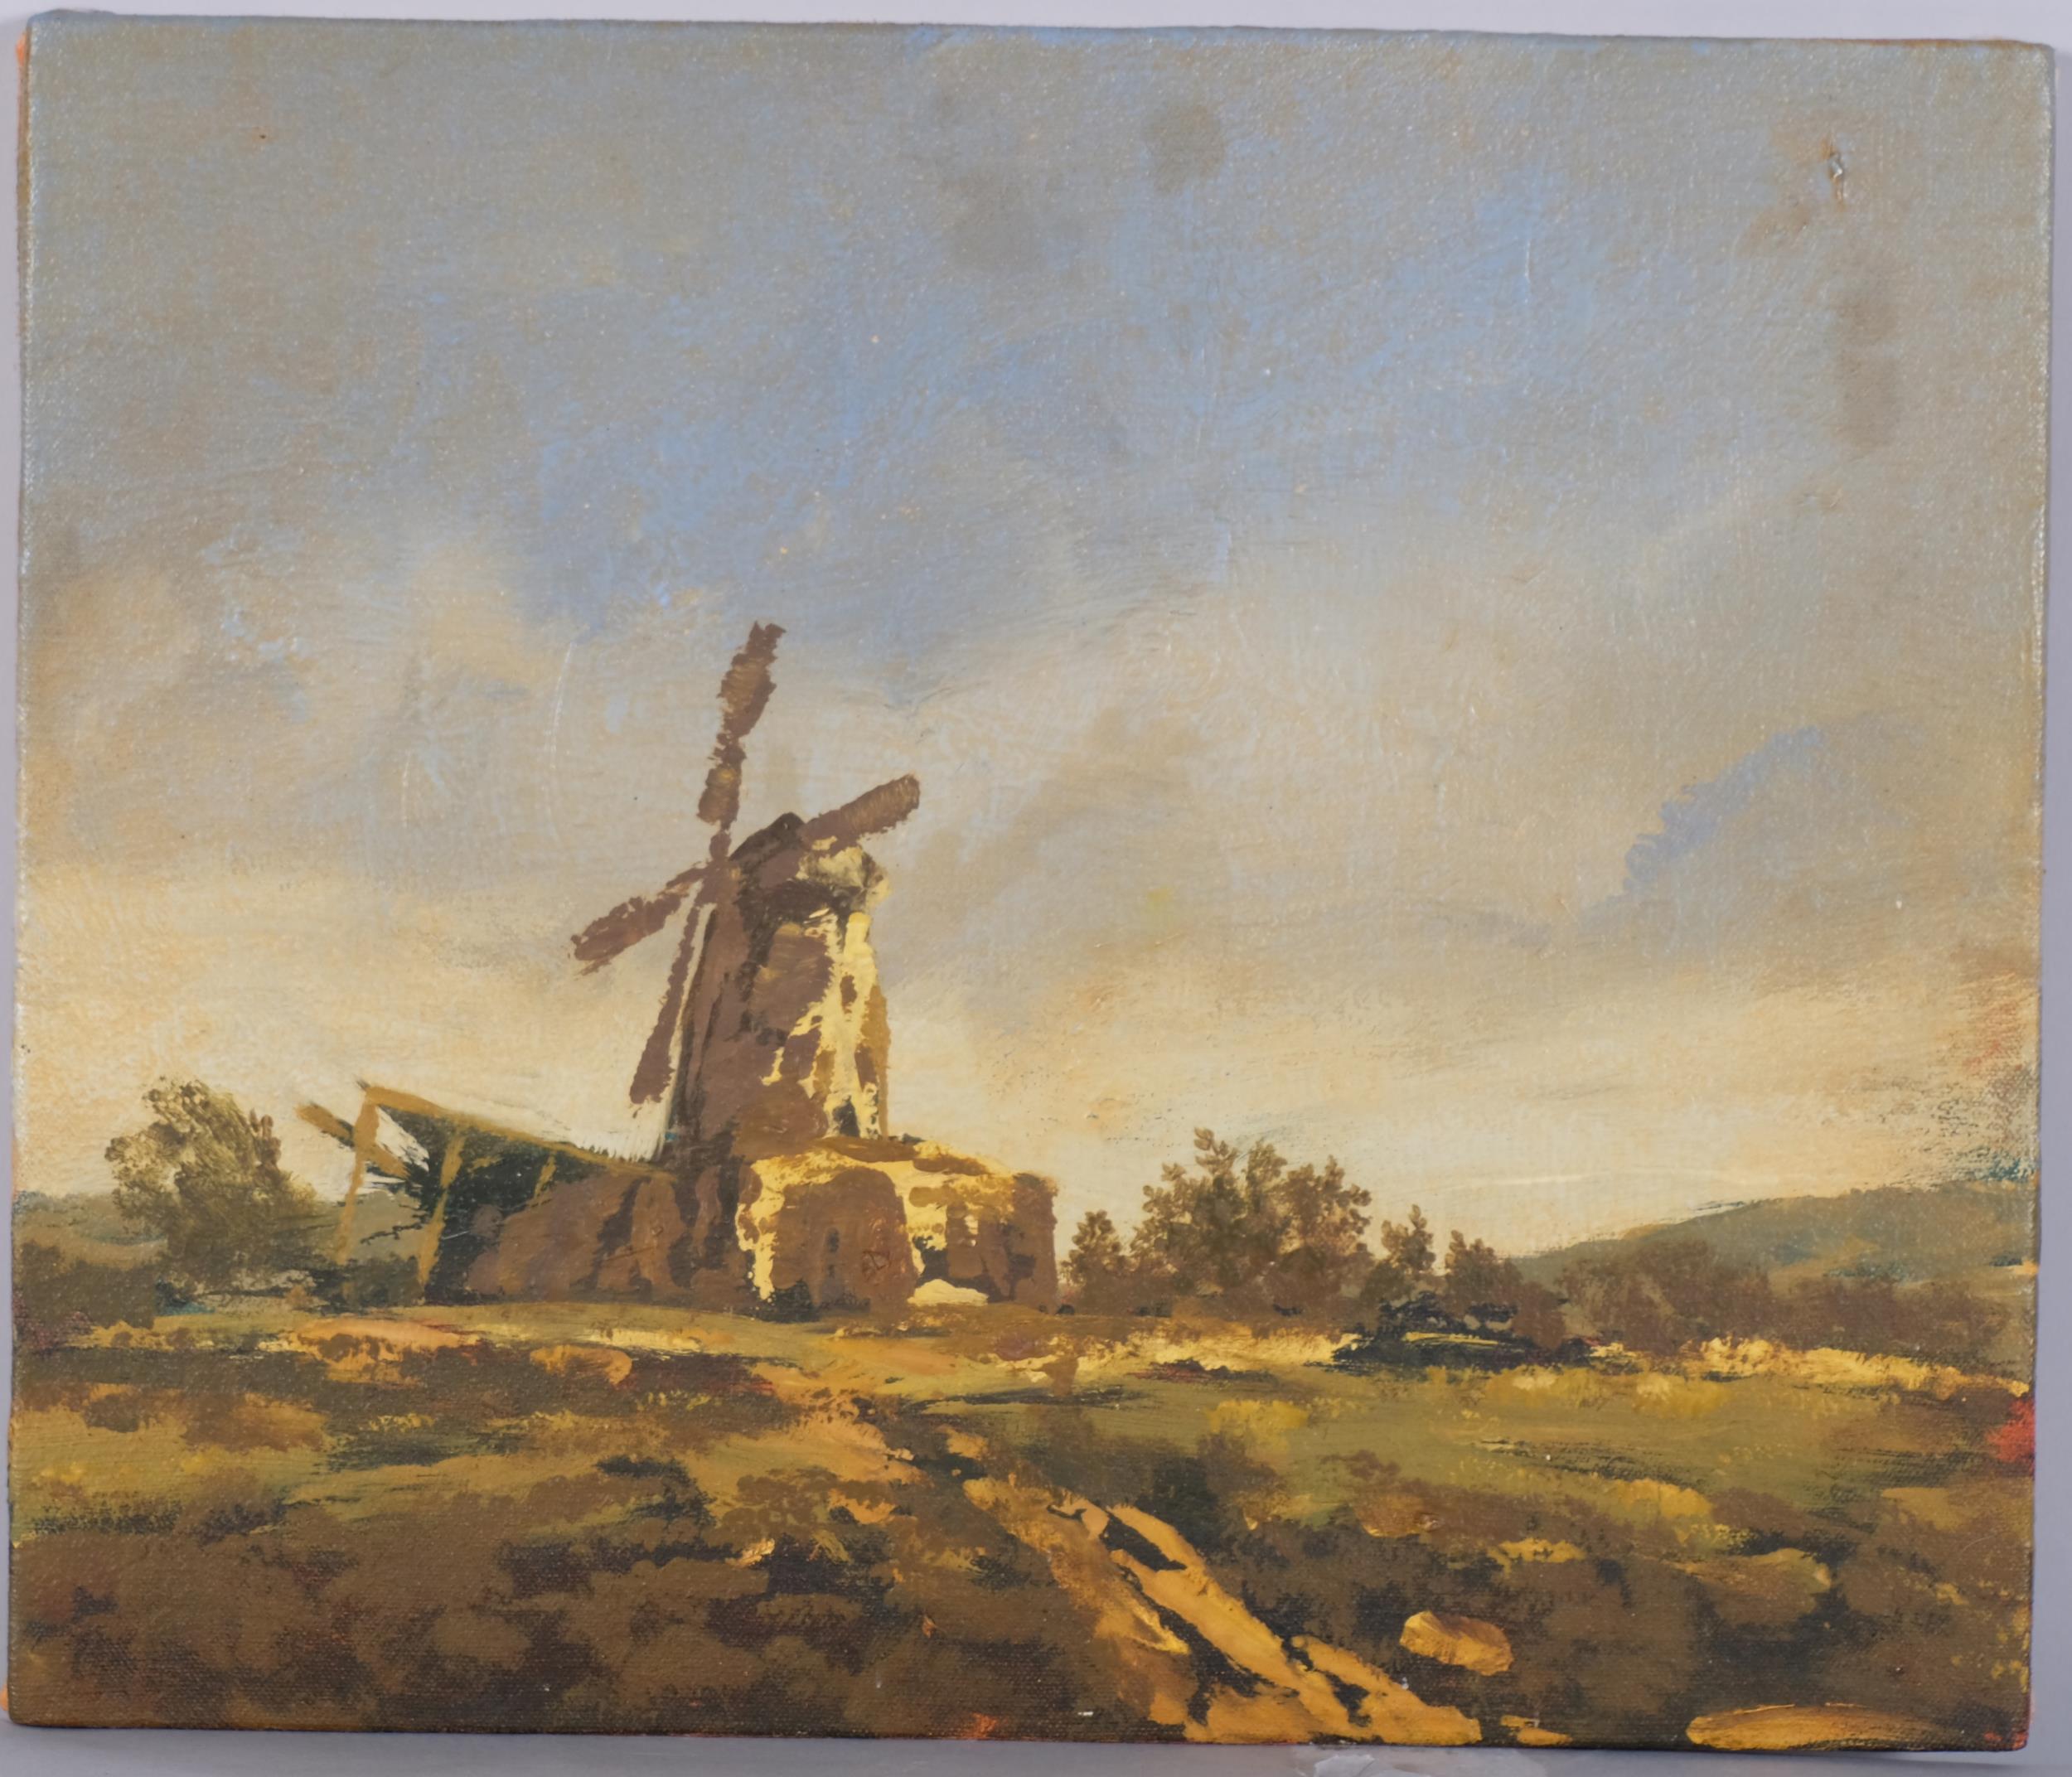 Alan Rankle, landscape study after Henry Bright, oil on canvas laid on board, signed and dated